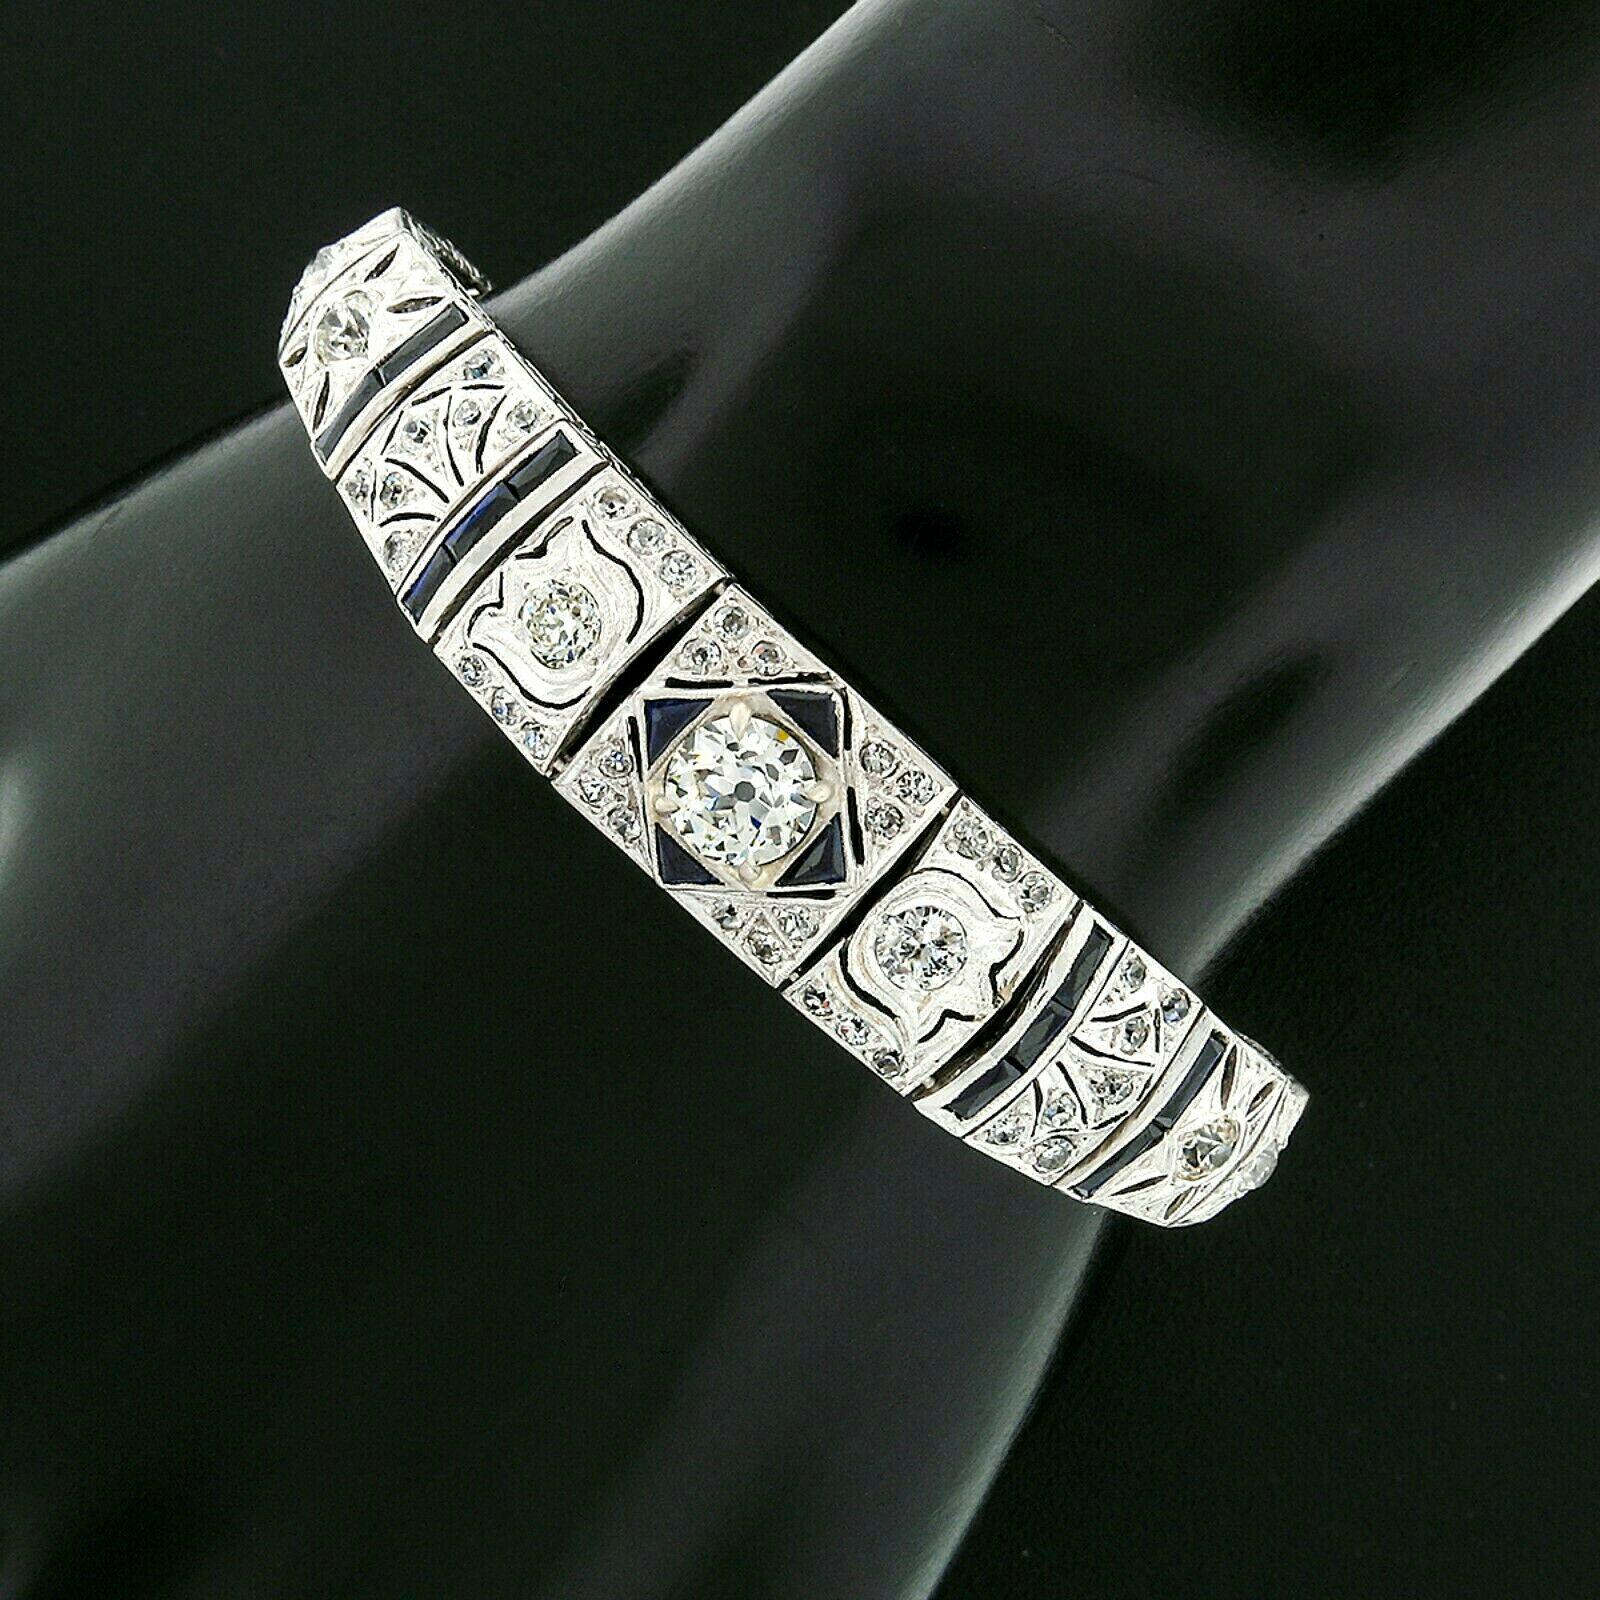 This gorgeous antique filigree bracelet was crafted from solid 900 platinum during the art deco period. It features a beautiful, GIA certified, old European cut diamond prong set at its center. This center diamond is exceptionally brilliant and